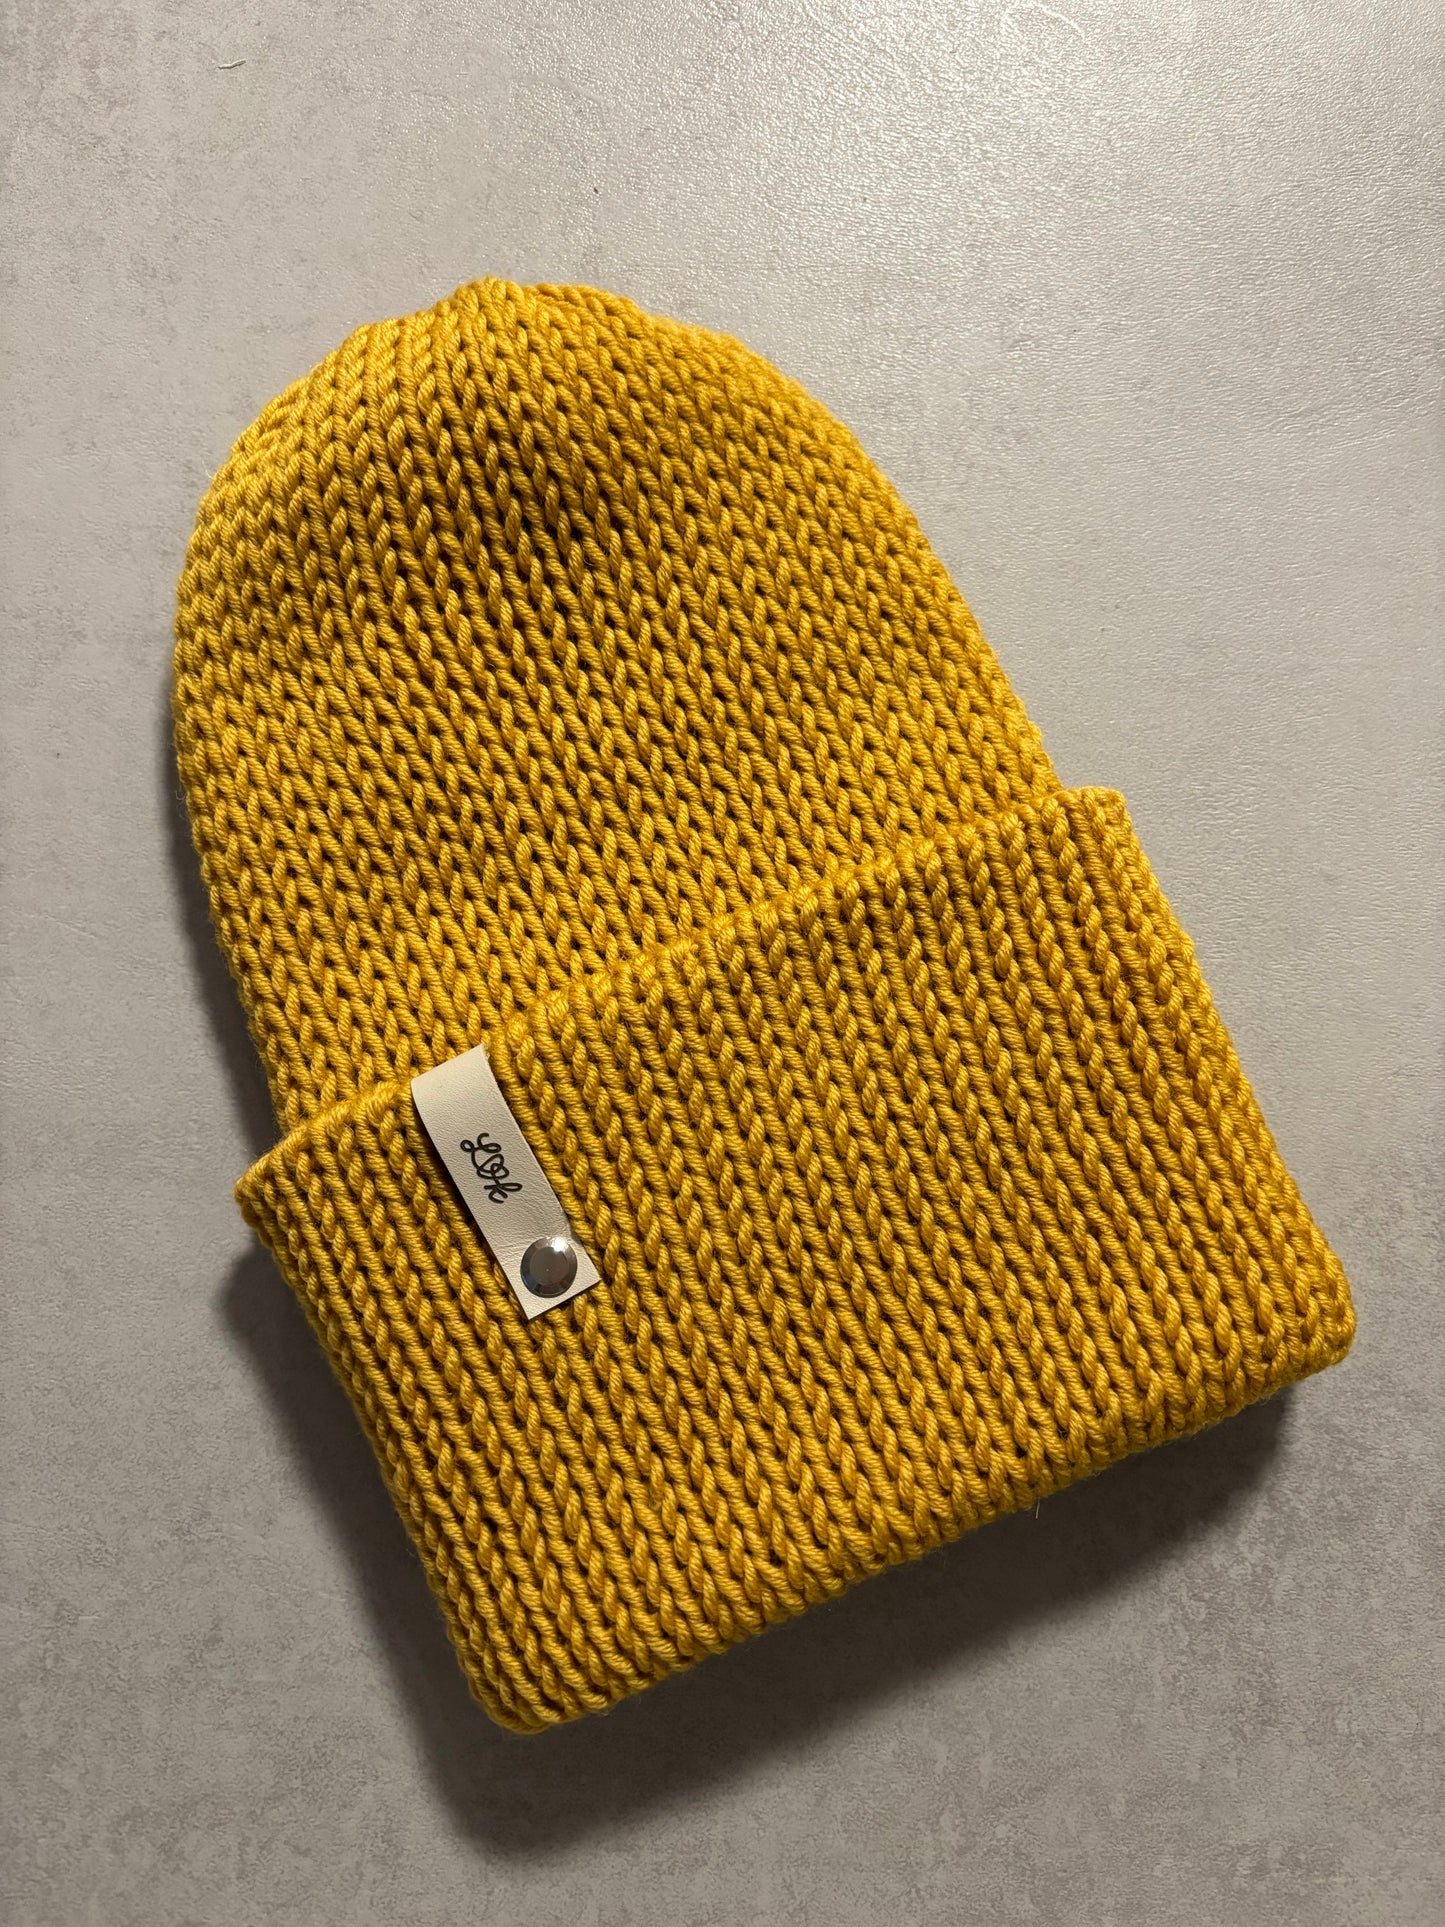 Hand-knitted hat made from 100% merino wool in many colours